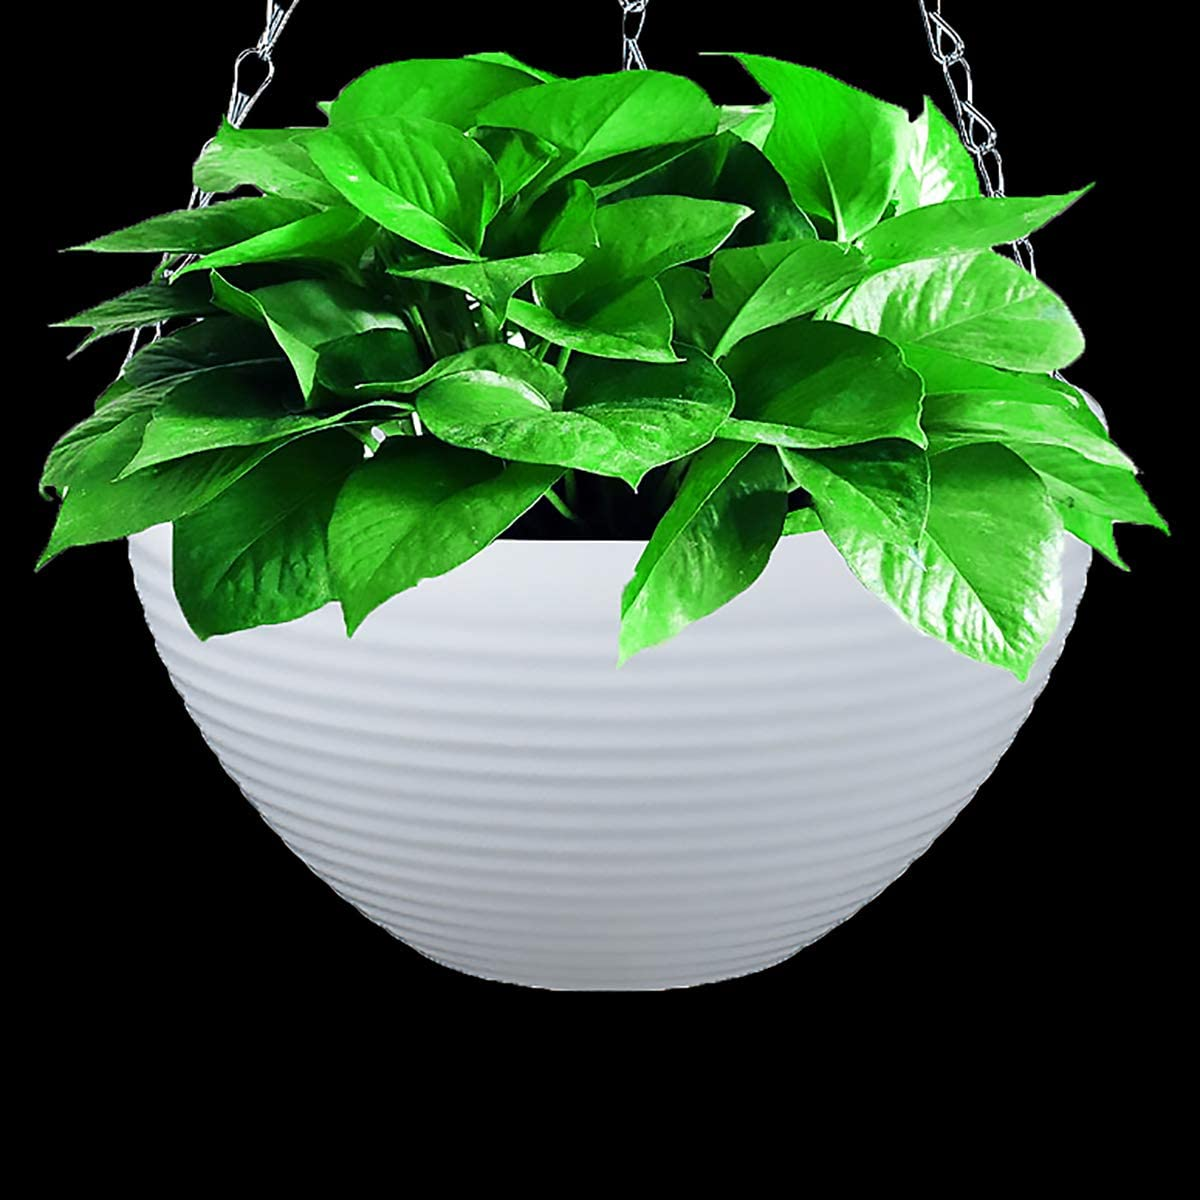 Set of 7 Colors Self-Watering Hanging Planter Indoor Outdoor Garden Flower Plant Pot Container with Drainer and Hanging Chain